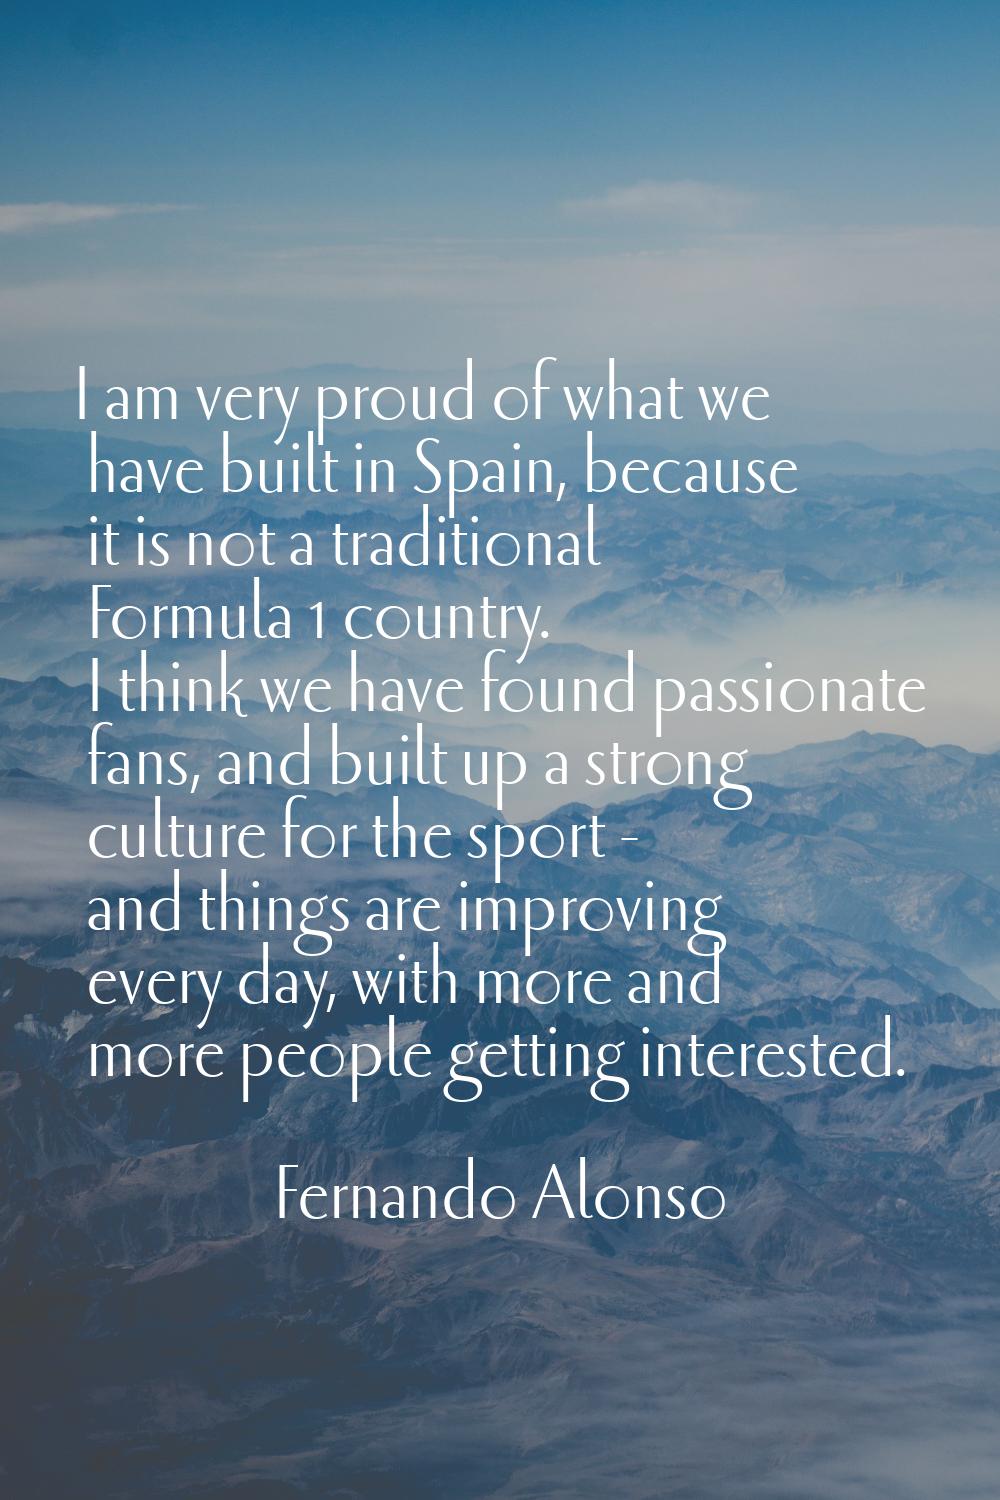 I am very proud of what we have built in Spain, because it is not a traditional Formula 1 country. 